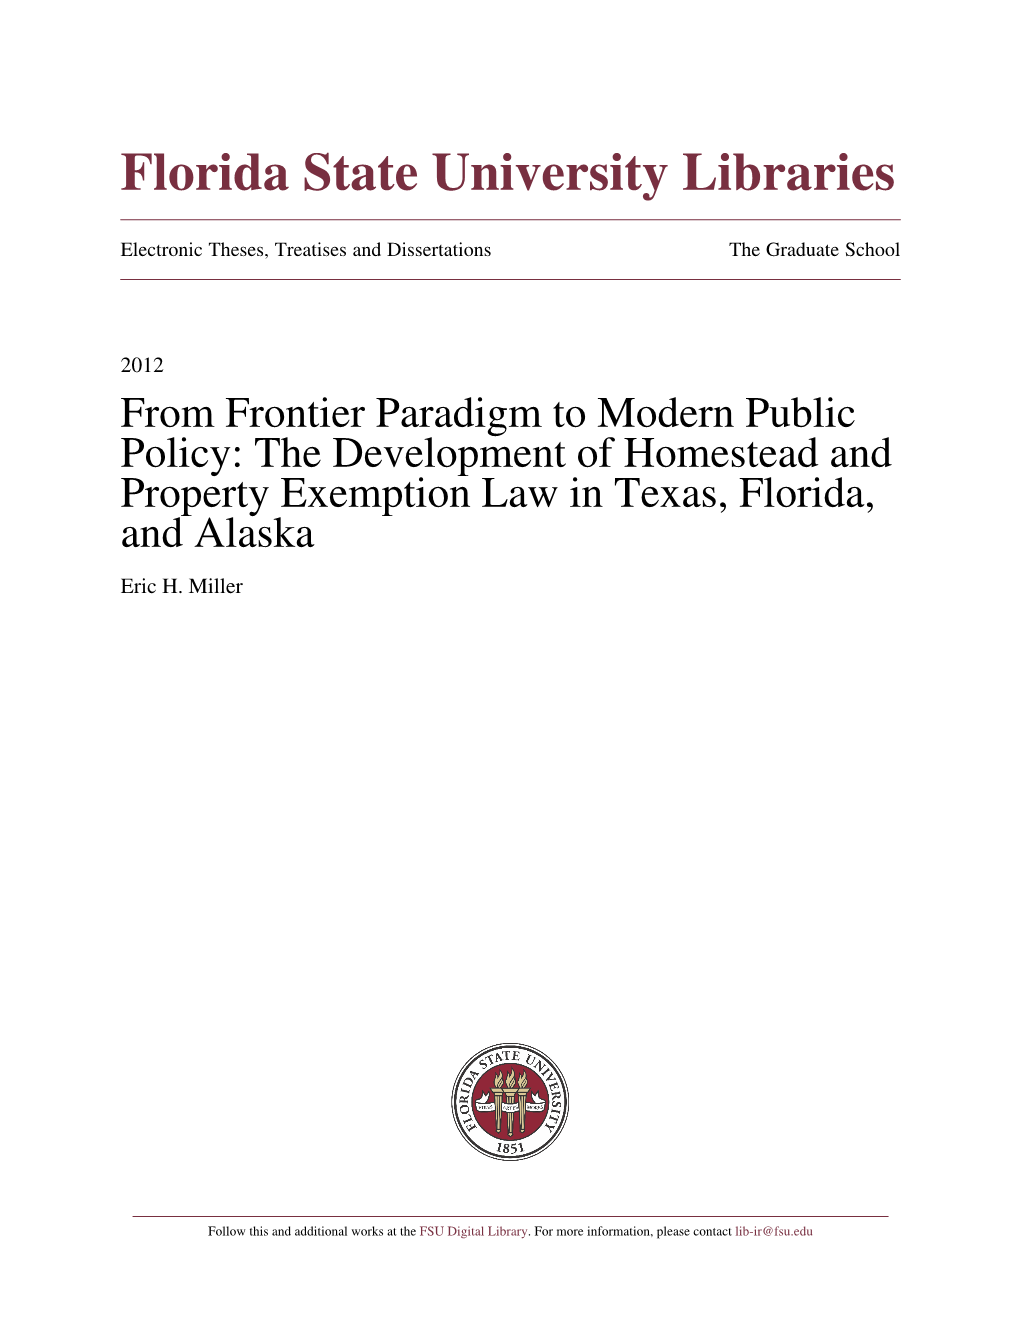 The Development of Homestead and Property Exemption Law in Texas, Florida, and Alaska Eric H